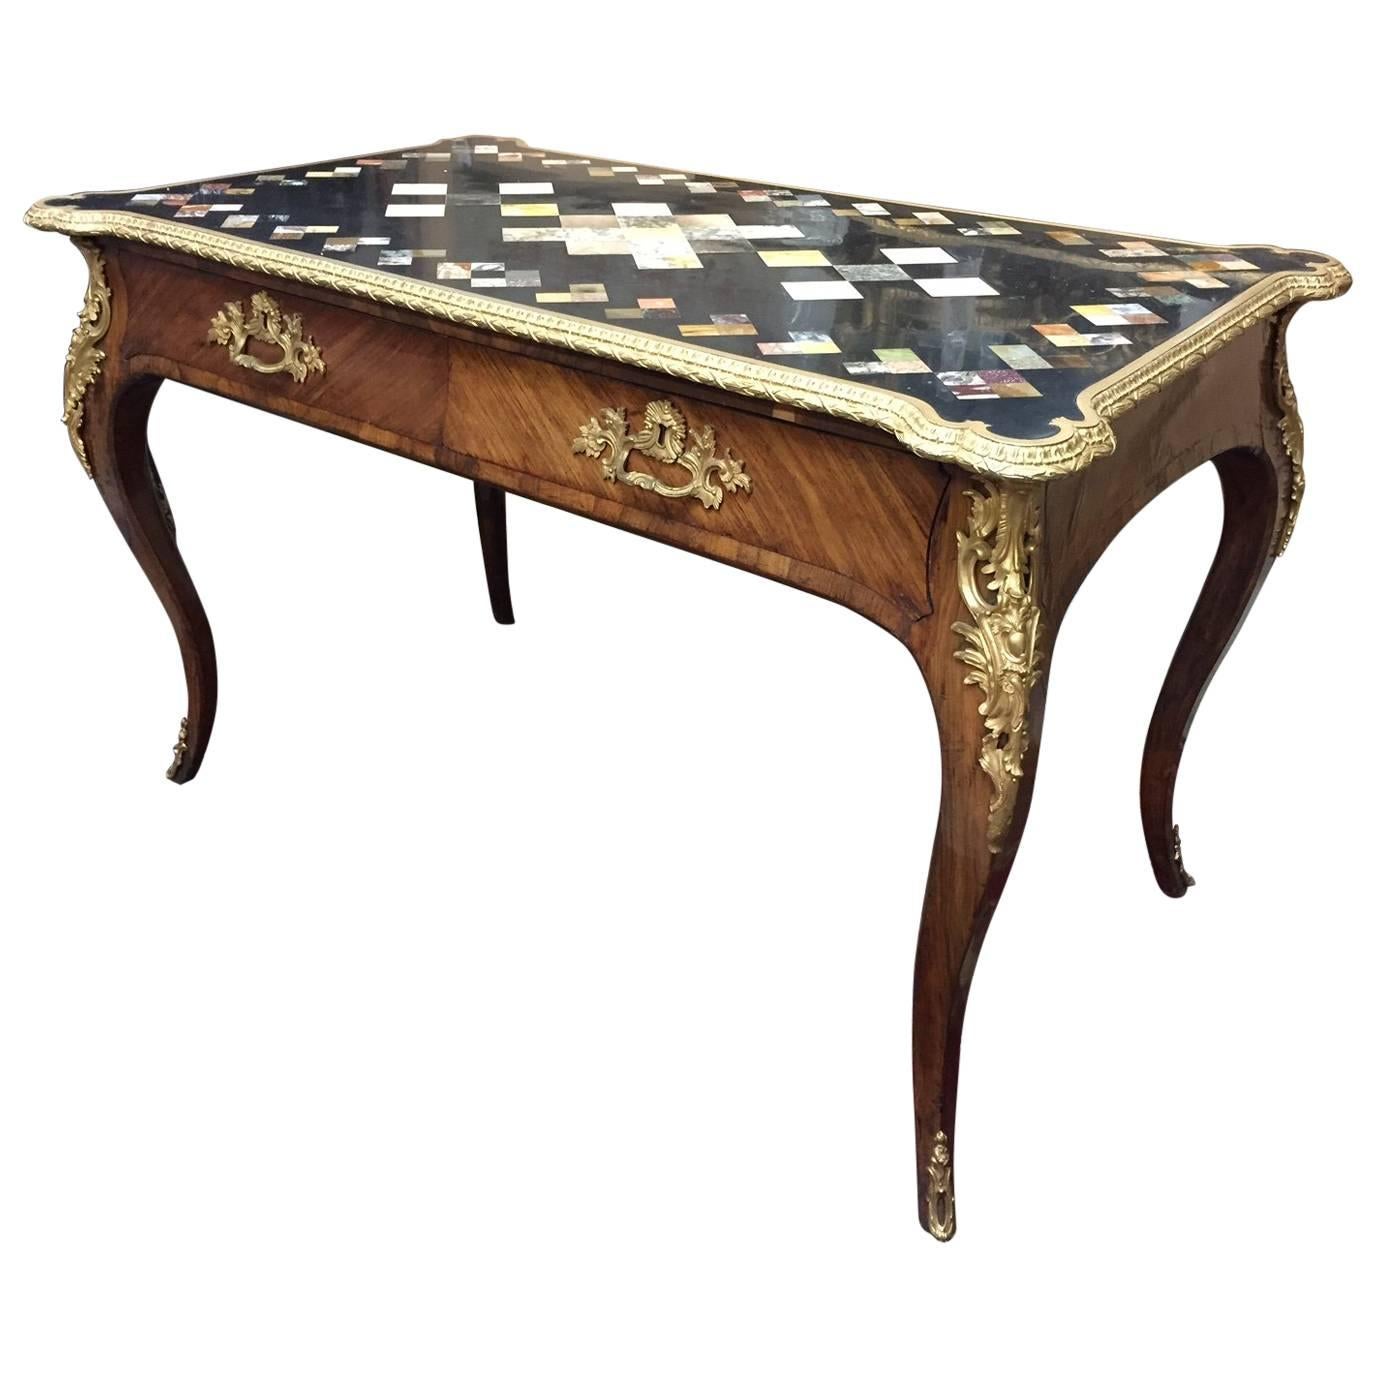  French Marble Inlay Topped Bureau Plat Desk, 19th Century